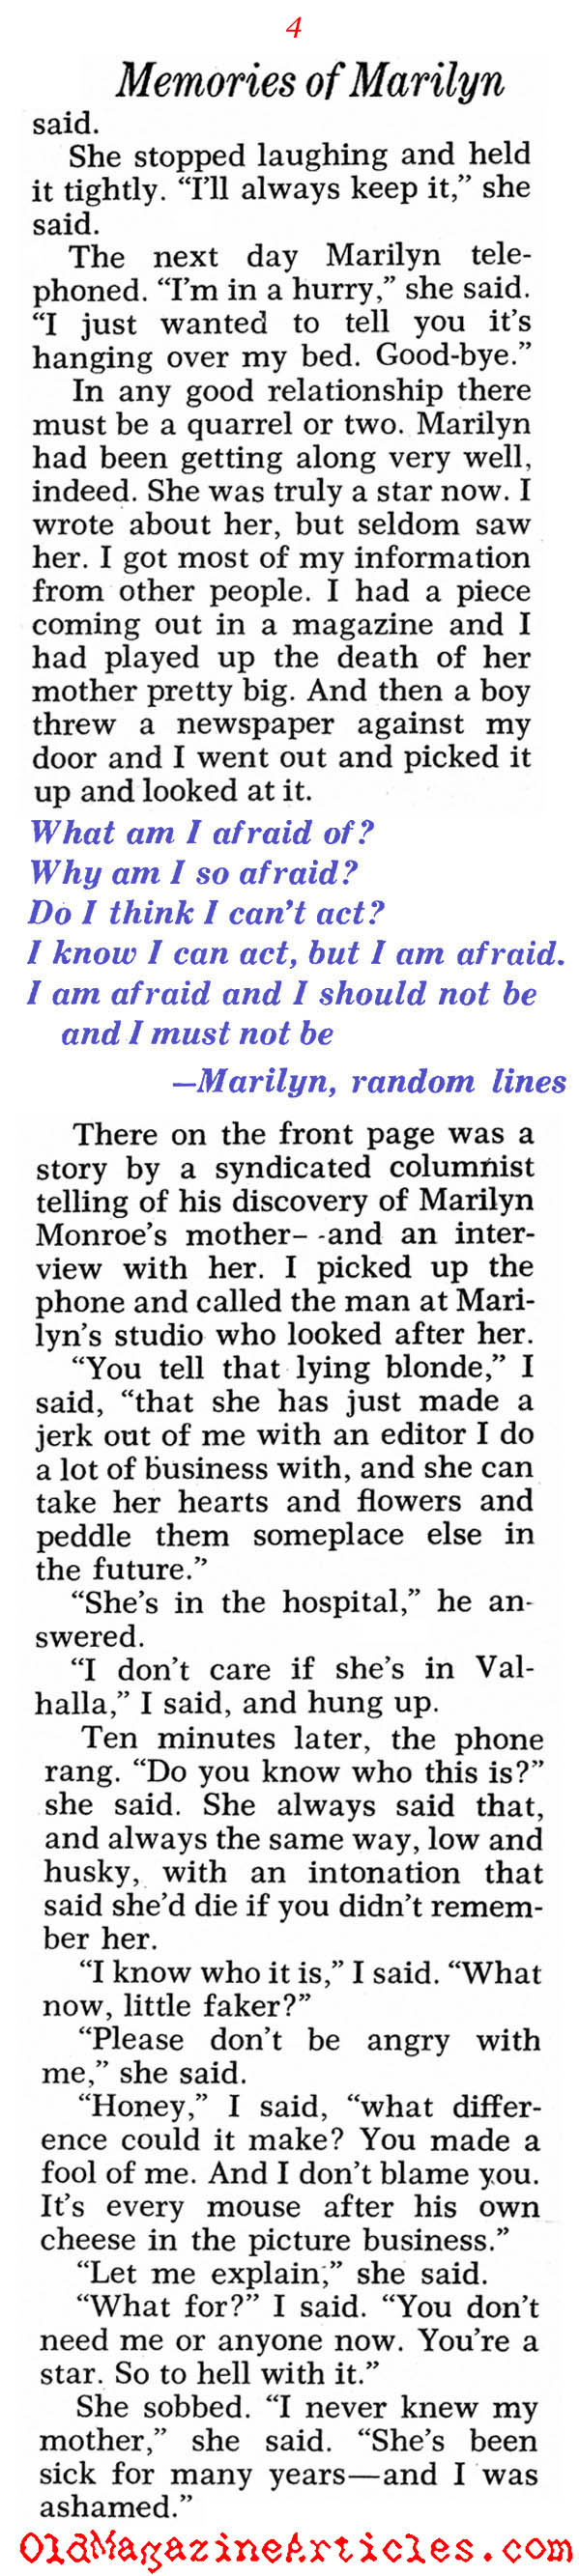 Warm Recollections of Marilyn (Pageant Magazine, 1971)